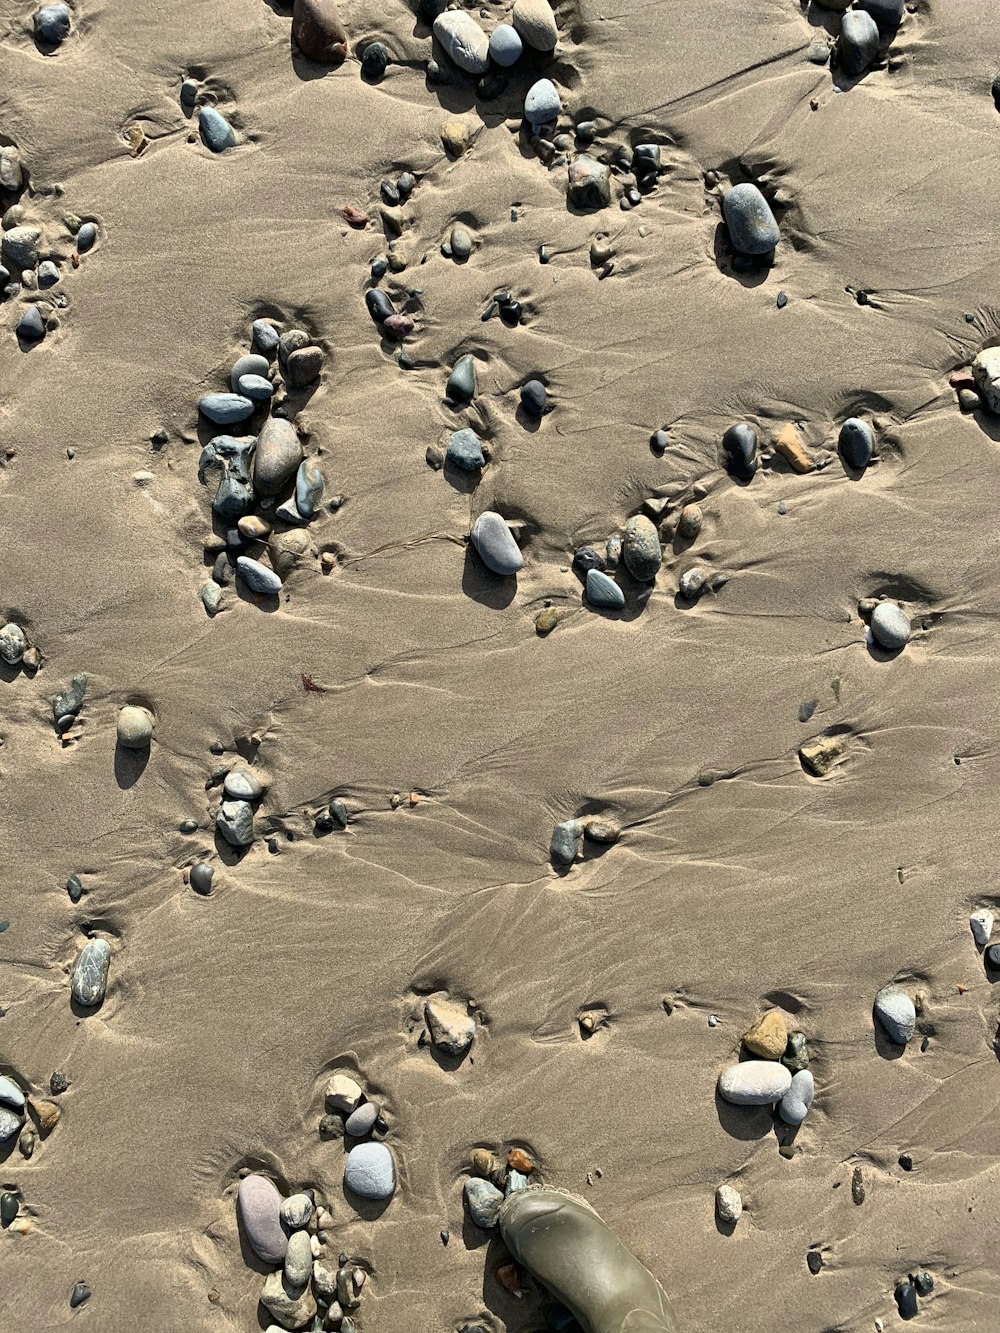 assorted pebbles on sand during daytime